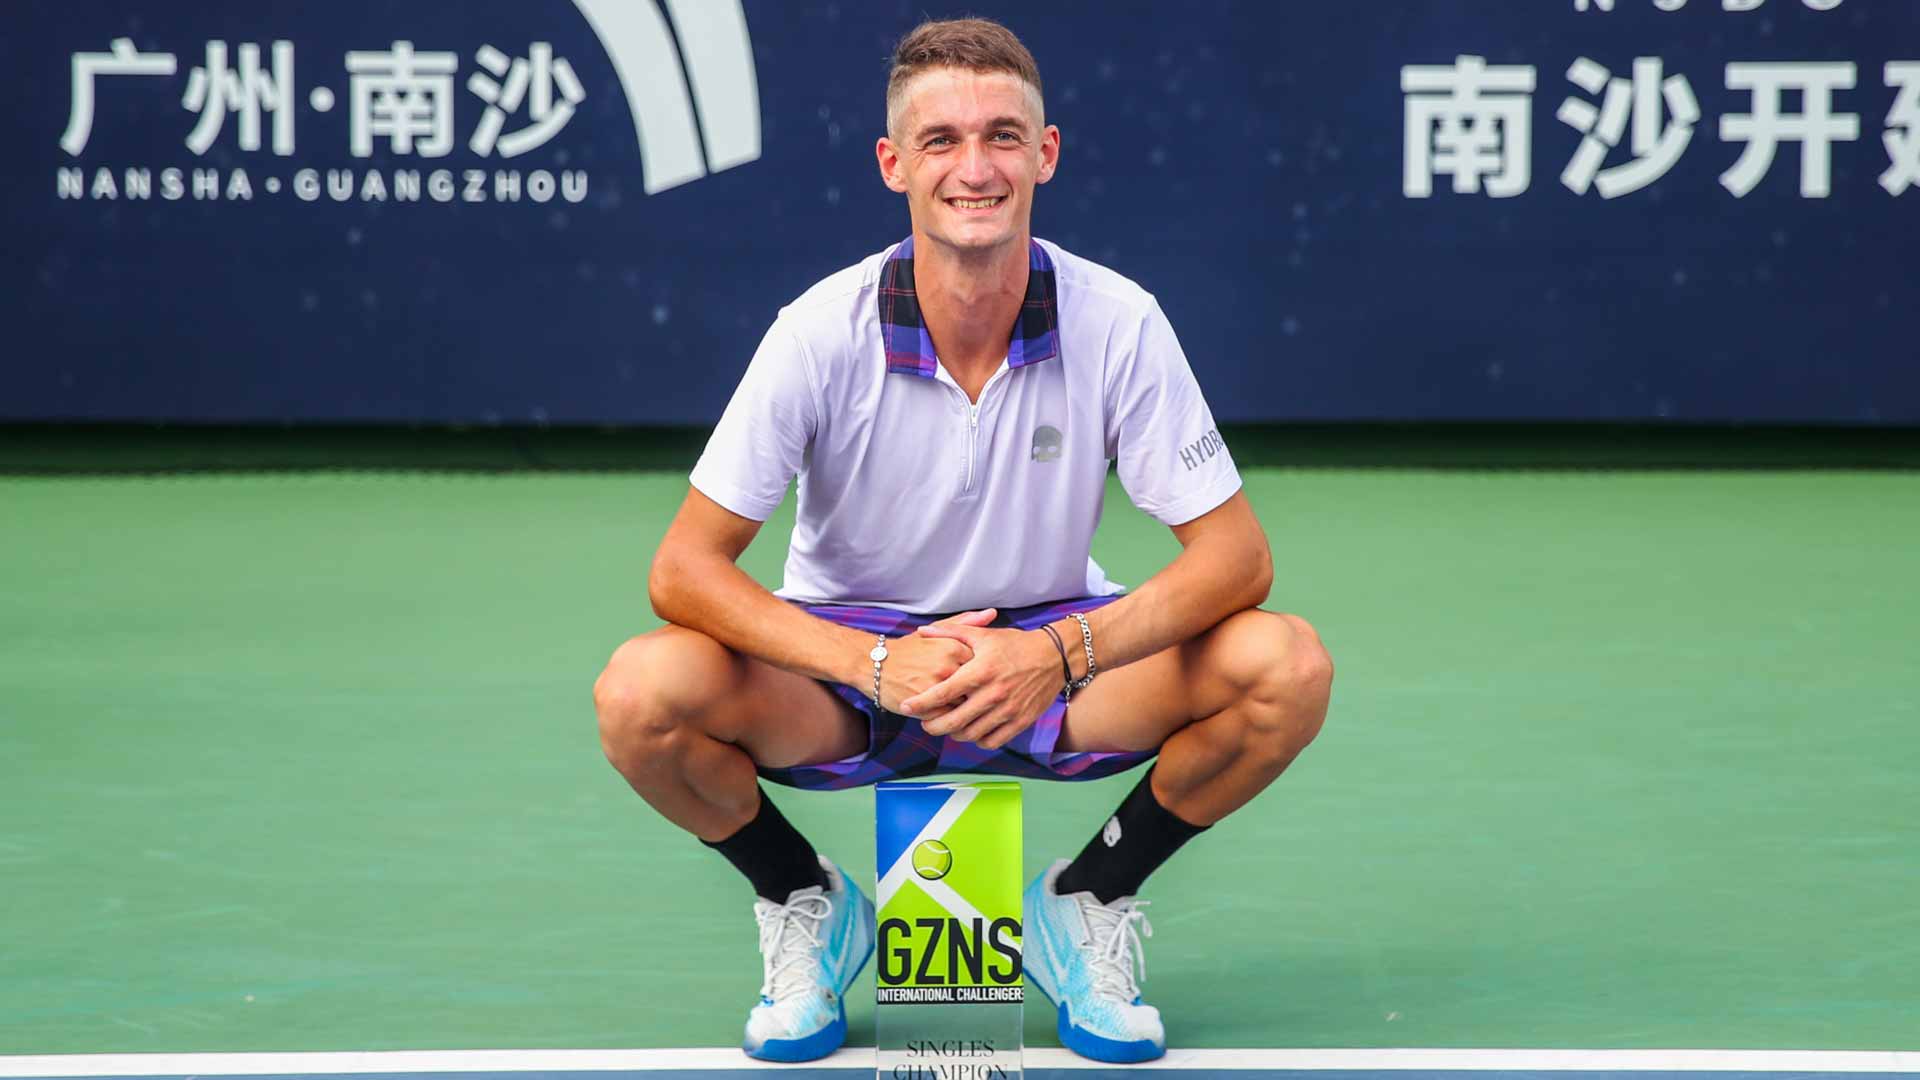 <a href='https://www.atptour.com/en/players/terence-atmane/a0gc/overview'>Terence Atmane</a> wins the Challenger 75 event in Guangzhou, China.